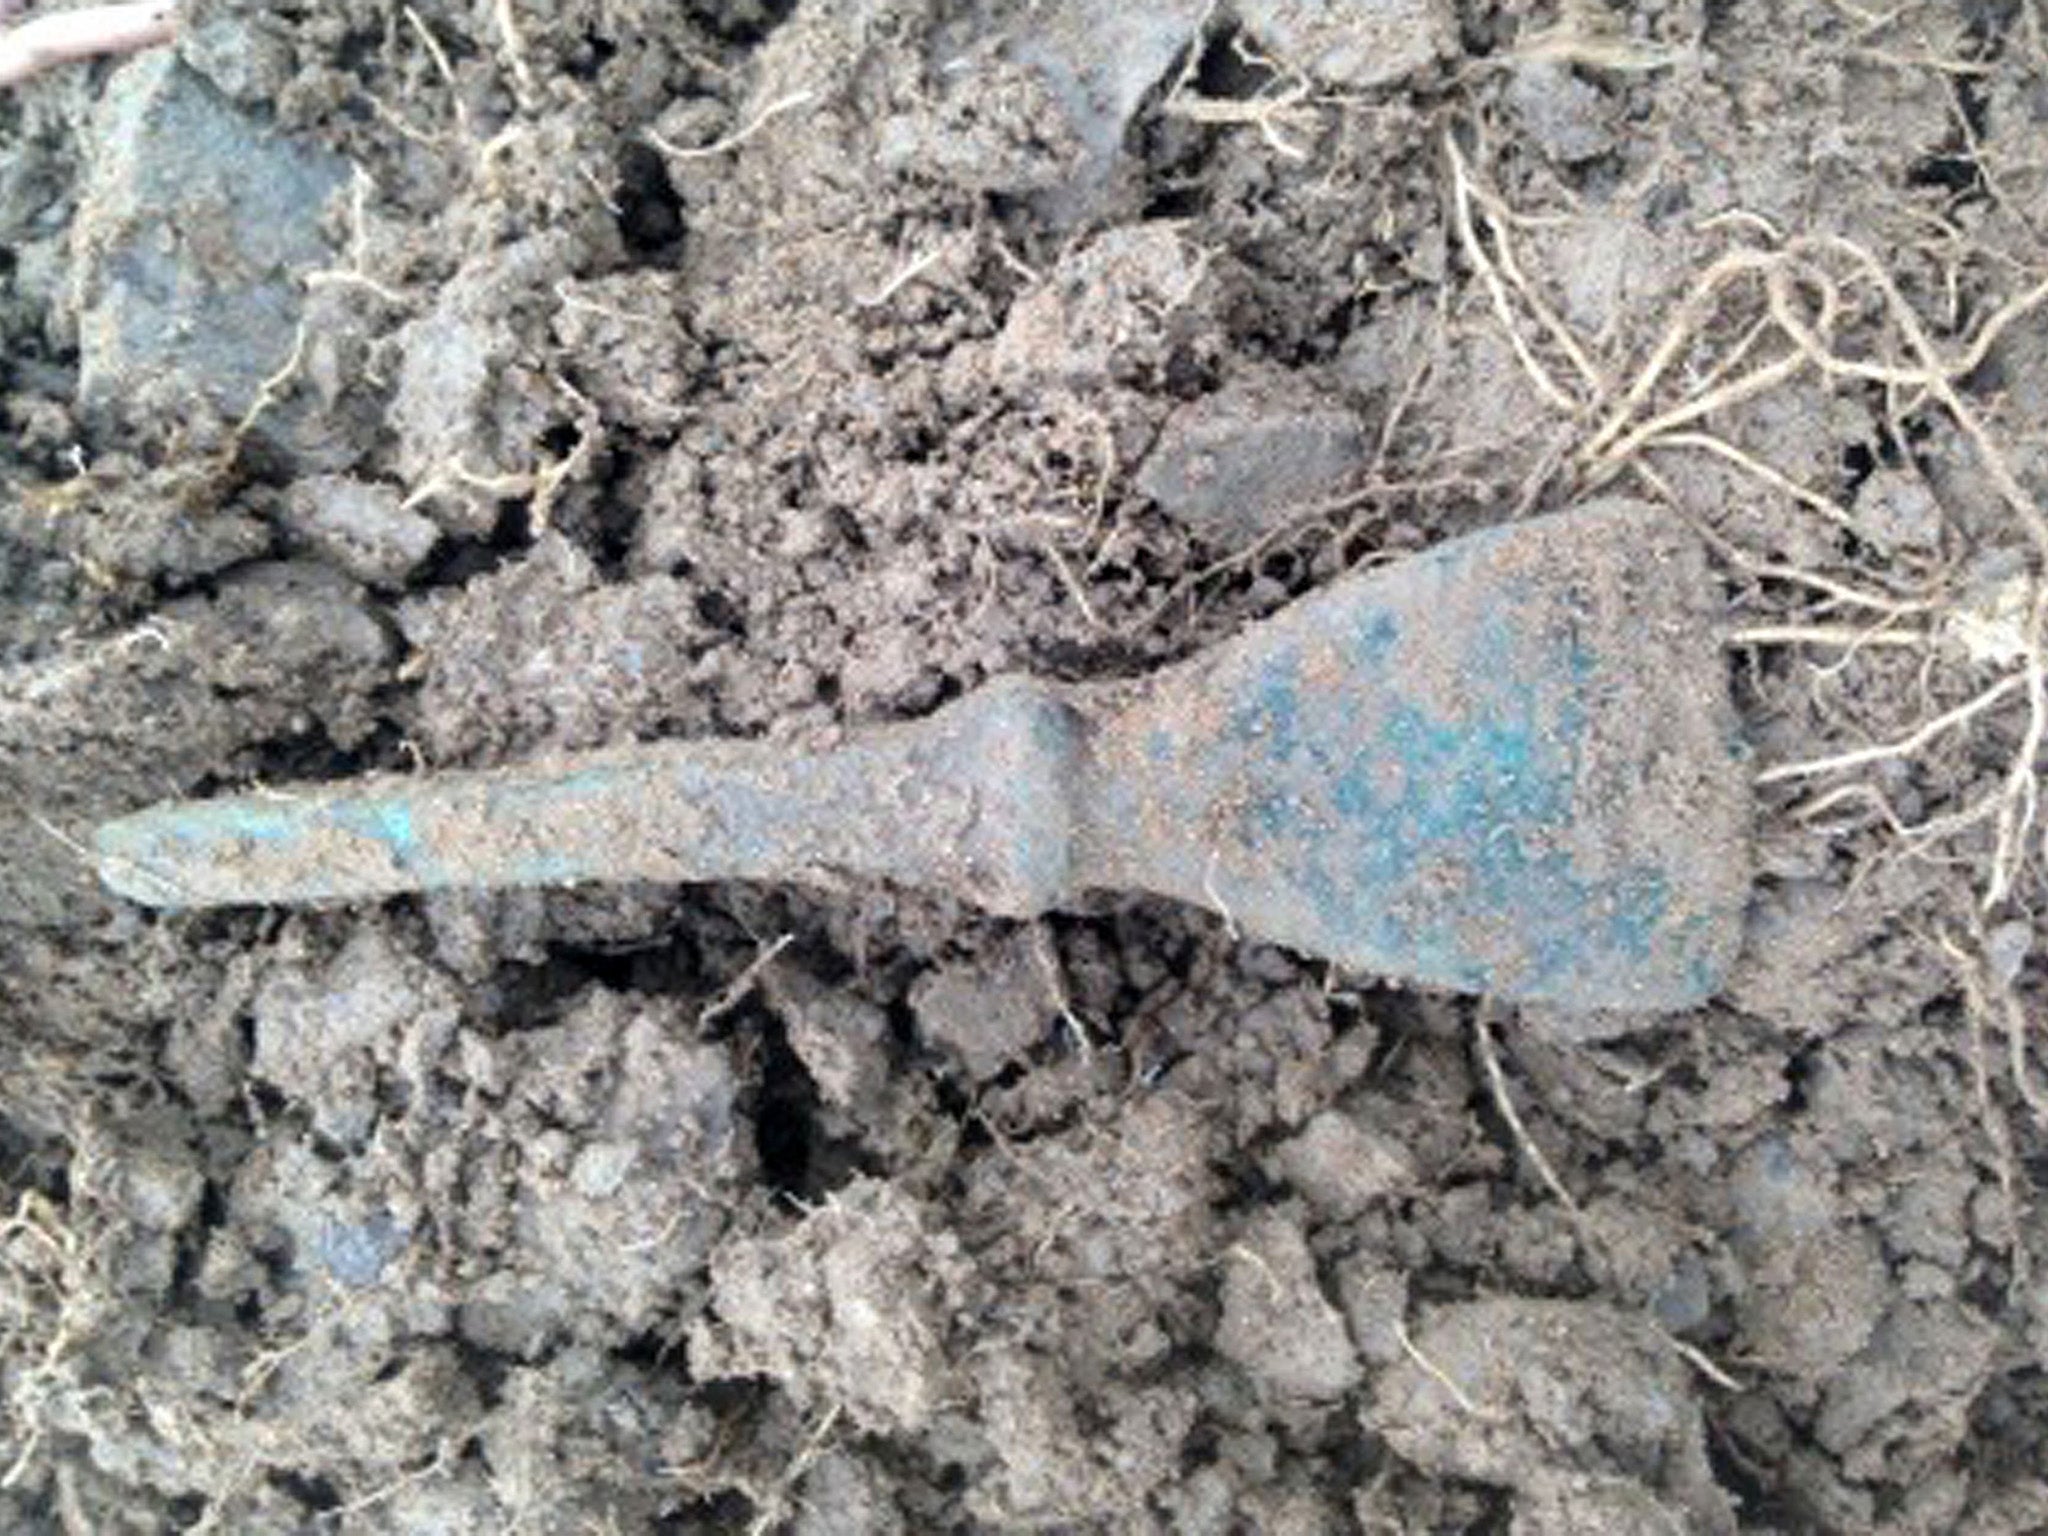 An untouched Bronze Age burial site is due to be excavated thanks to a "lucky" discovery by a pair of metal detector enthusiasts.